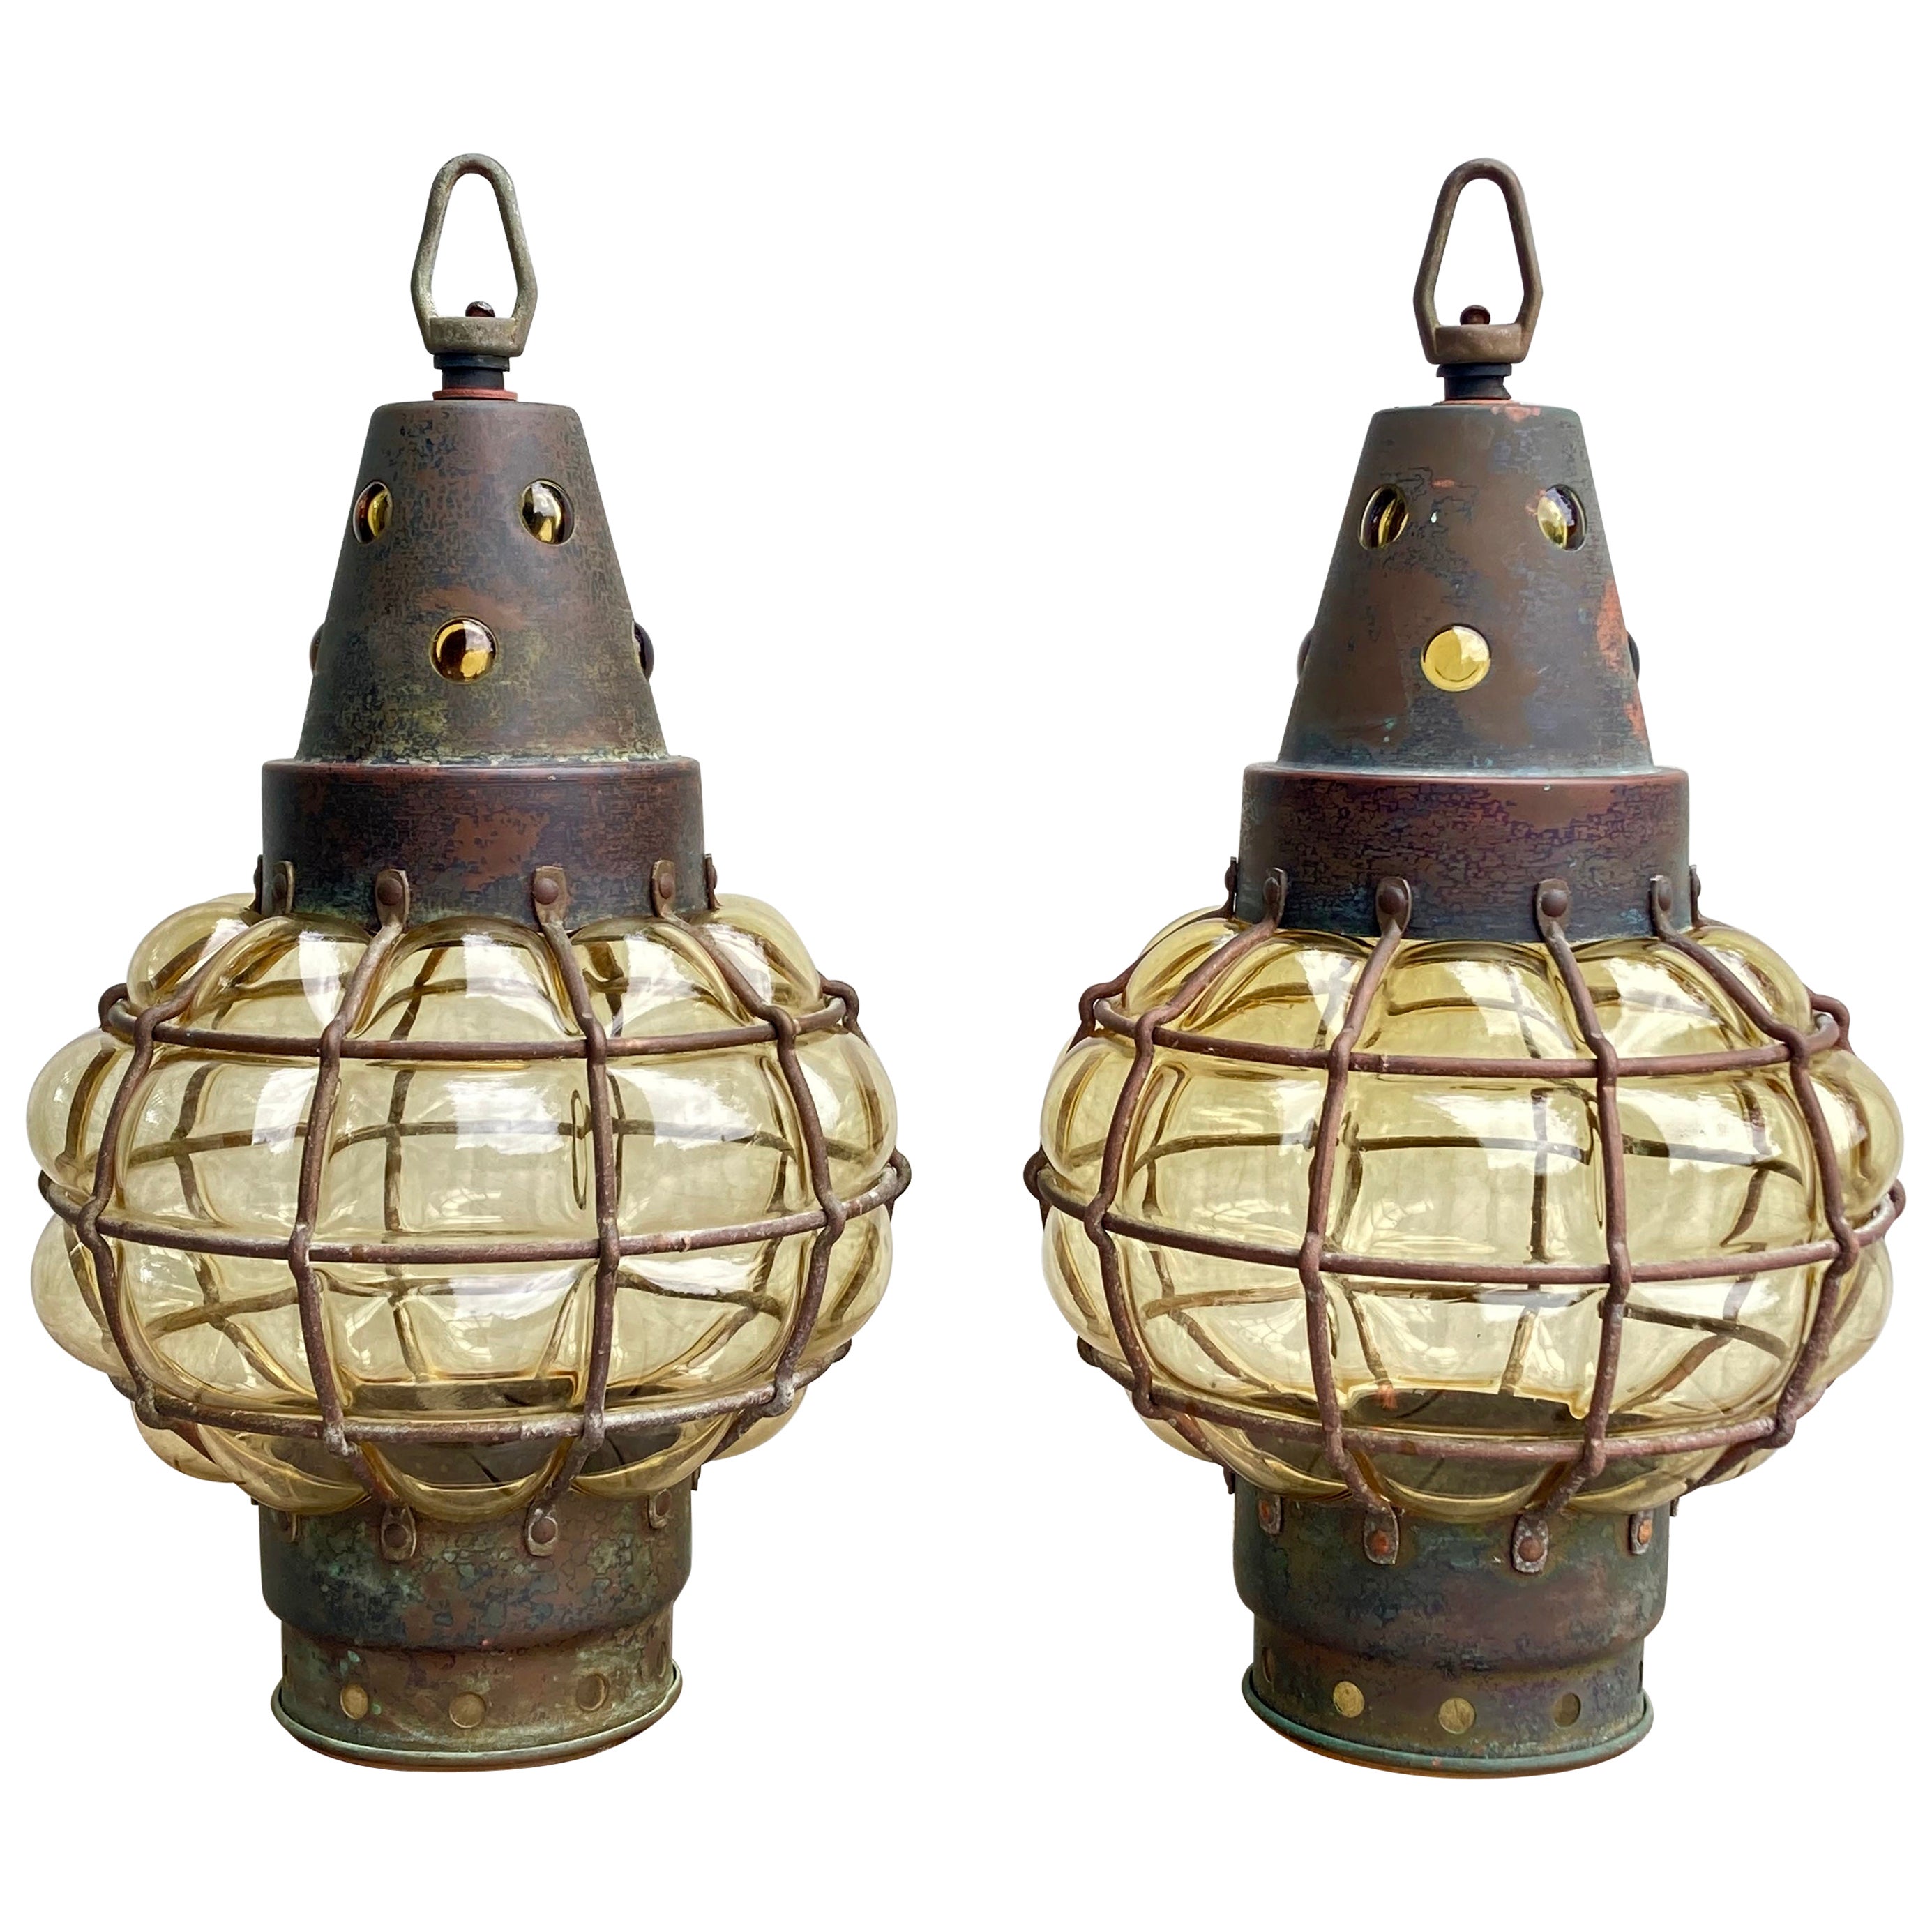 Pair of Antique 1920s Arts & Crafts Hanging Lanterns in Metal and Handmade Glass